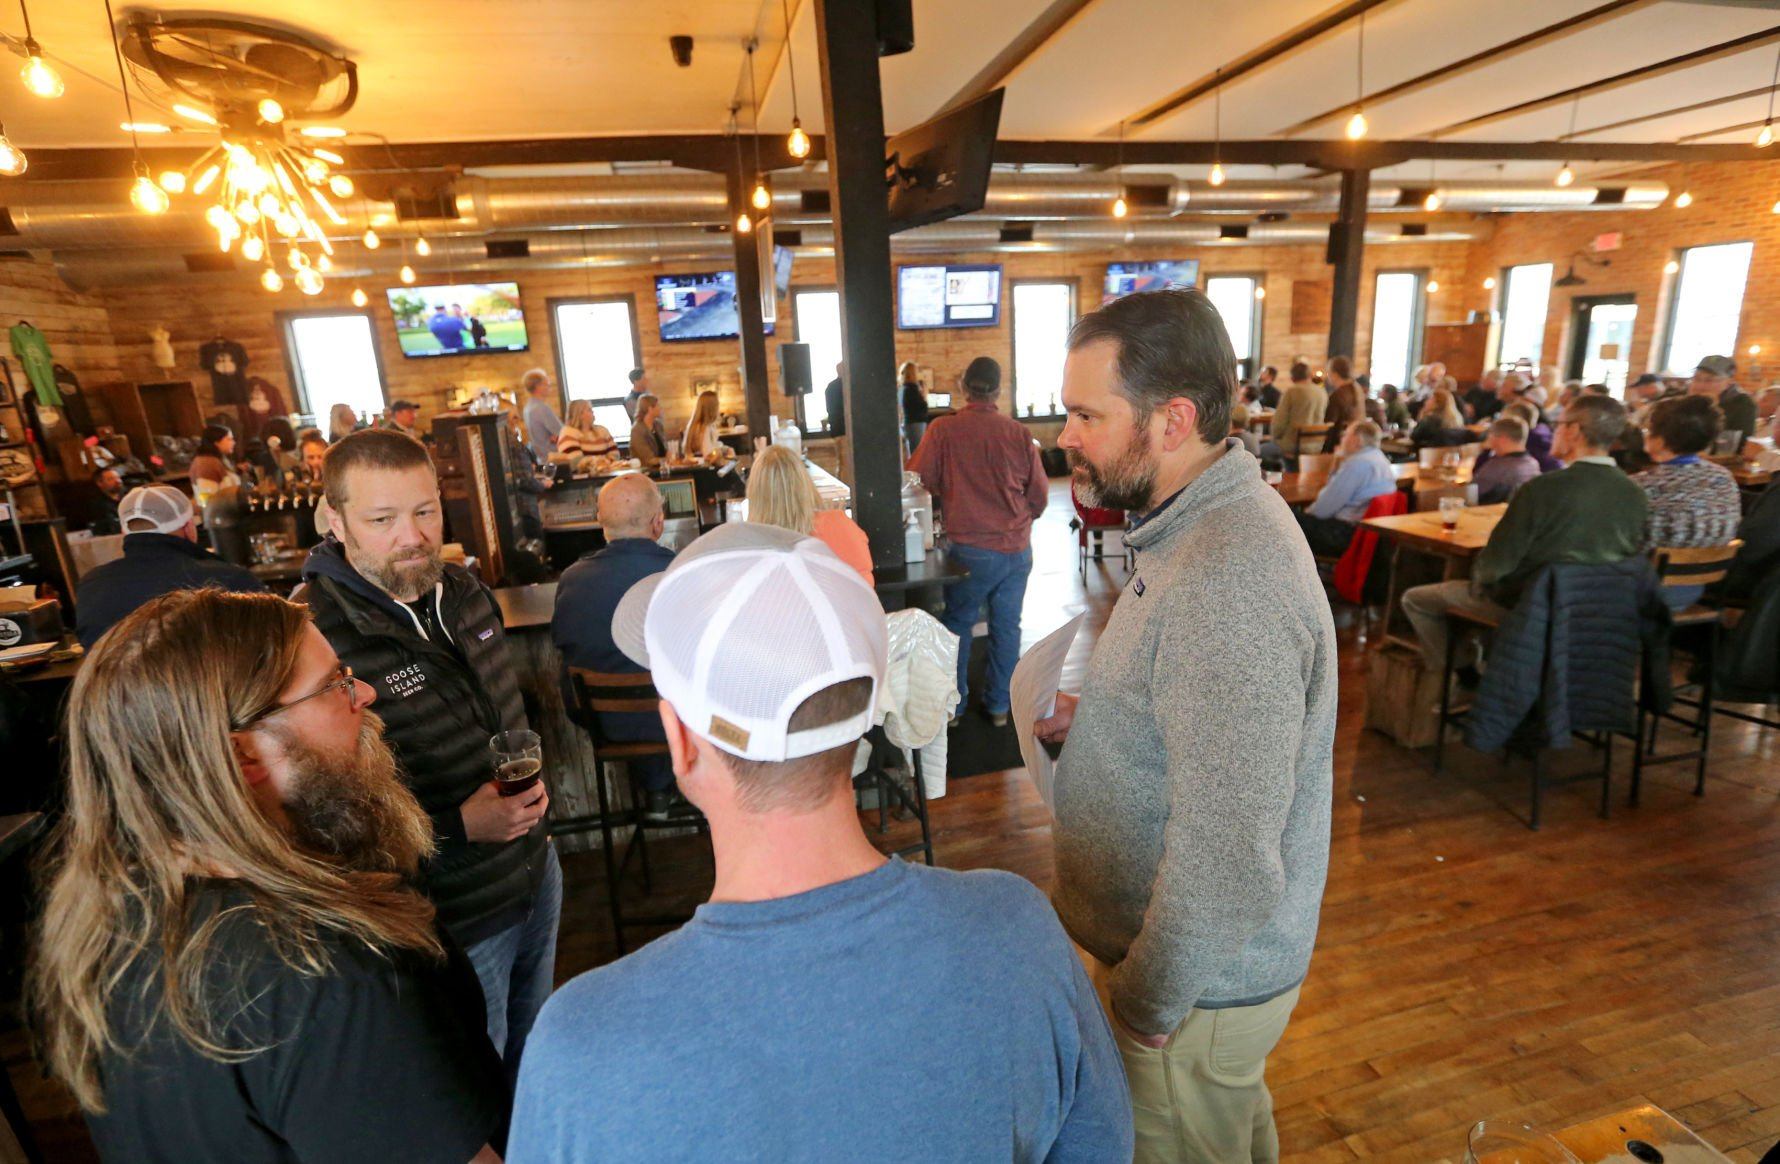 Nick Ashton (from left), of Cascade, Iowa; Daryl Hoedtke, of Chicago; Eric Miller, of Cascade, Iowa; and Mike Siegel, of Chicago, talk during a Farm to Brew event at Textile Brewing Co. in Dyersville, Iowa, on Wednesday, March 30, 2022.    PHOTO CREDIT: JESSICA REILLY